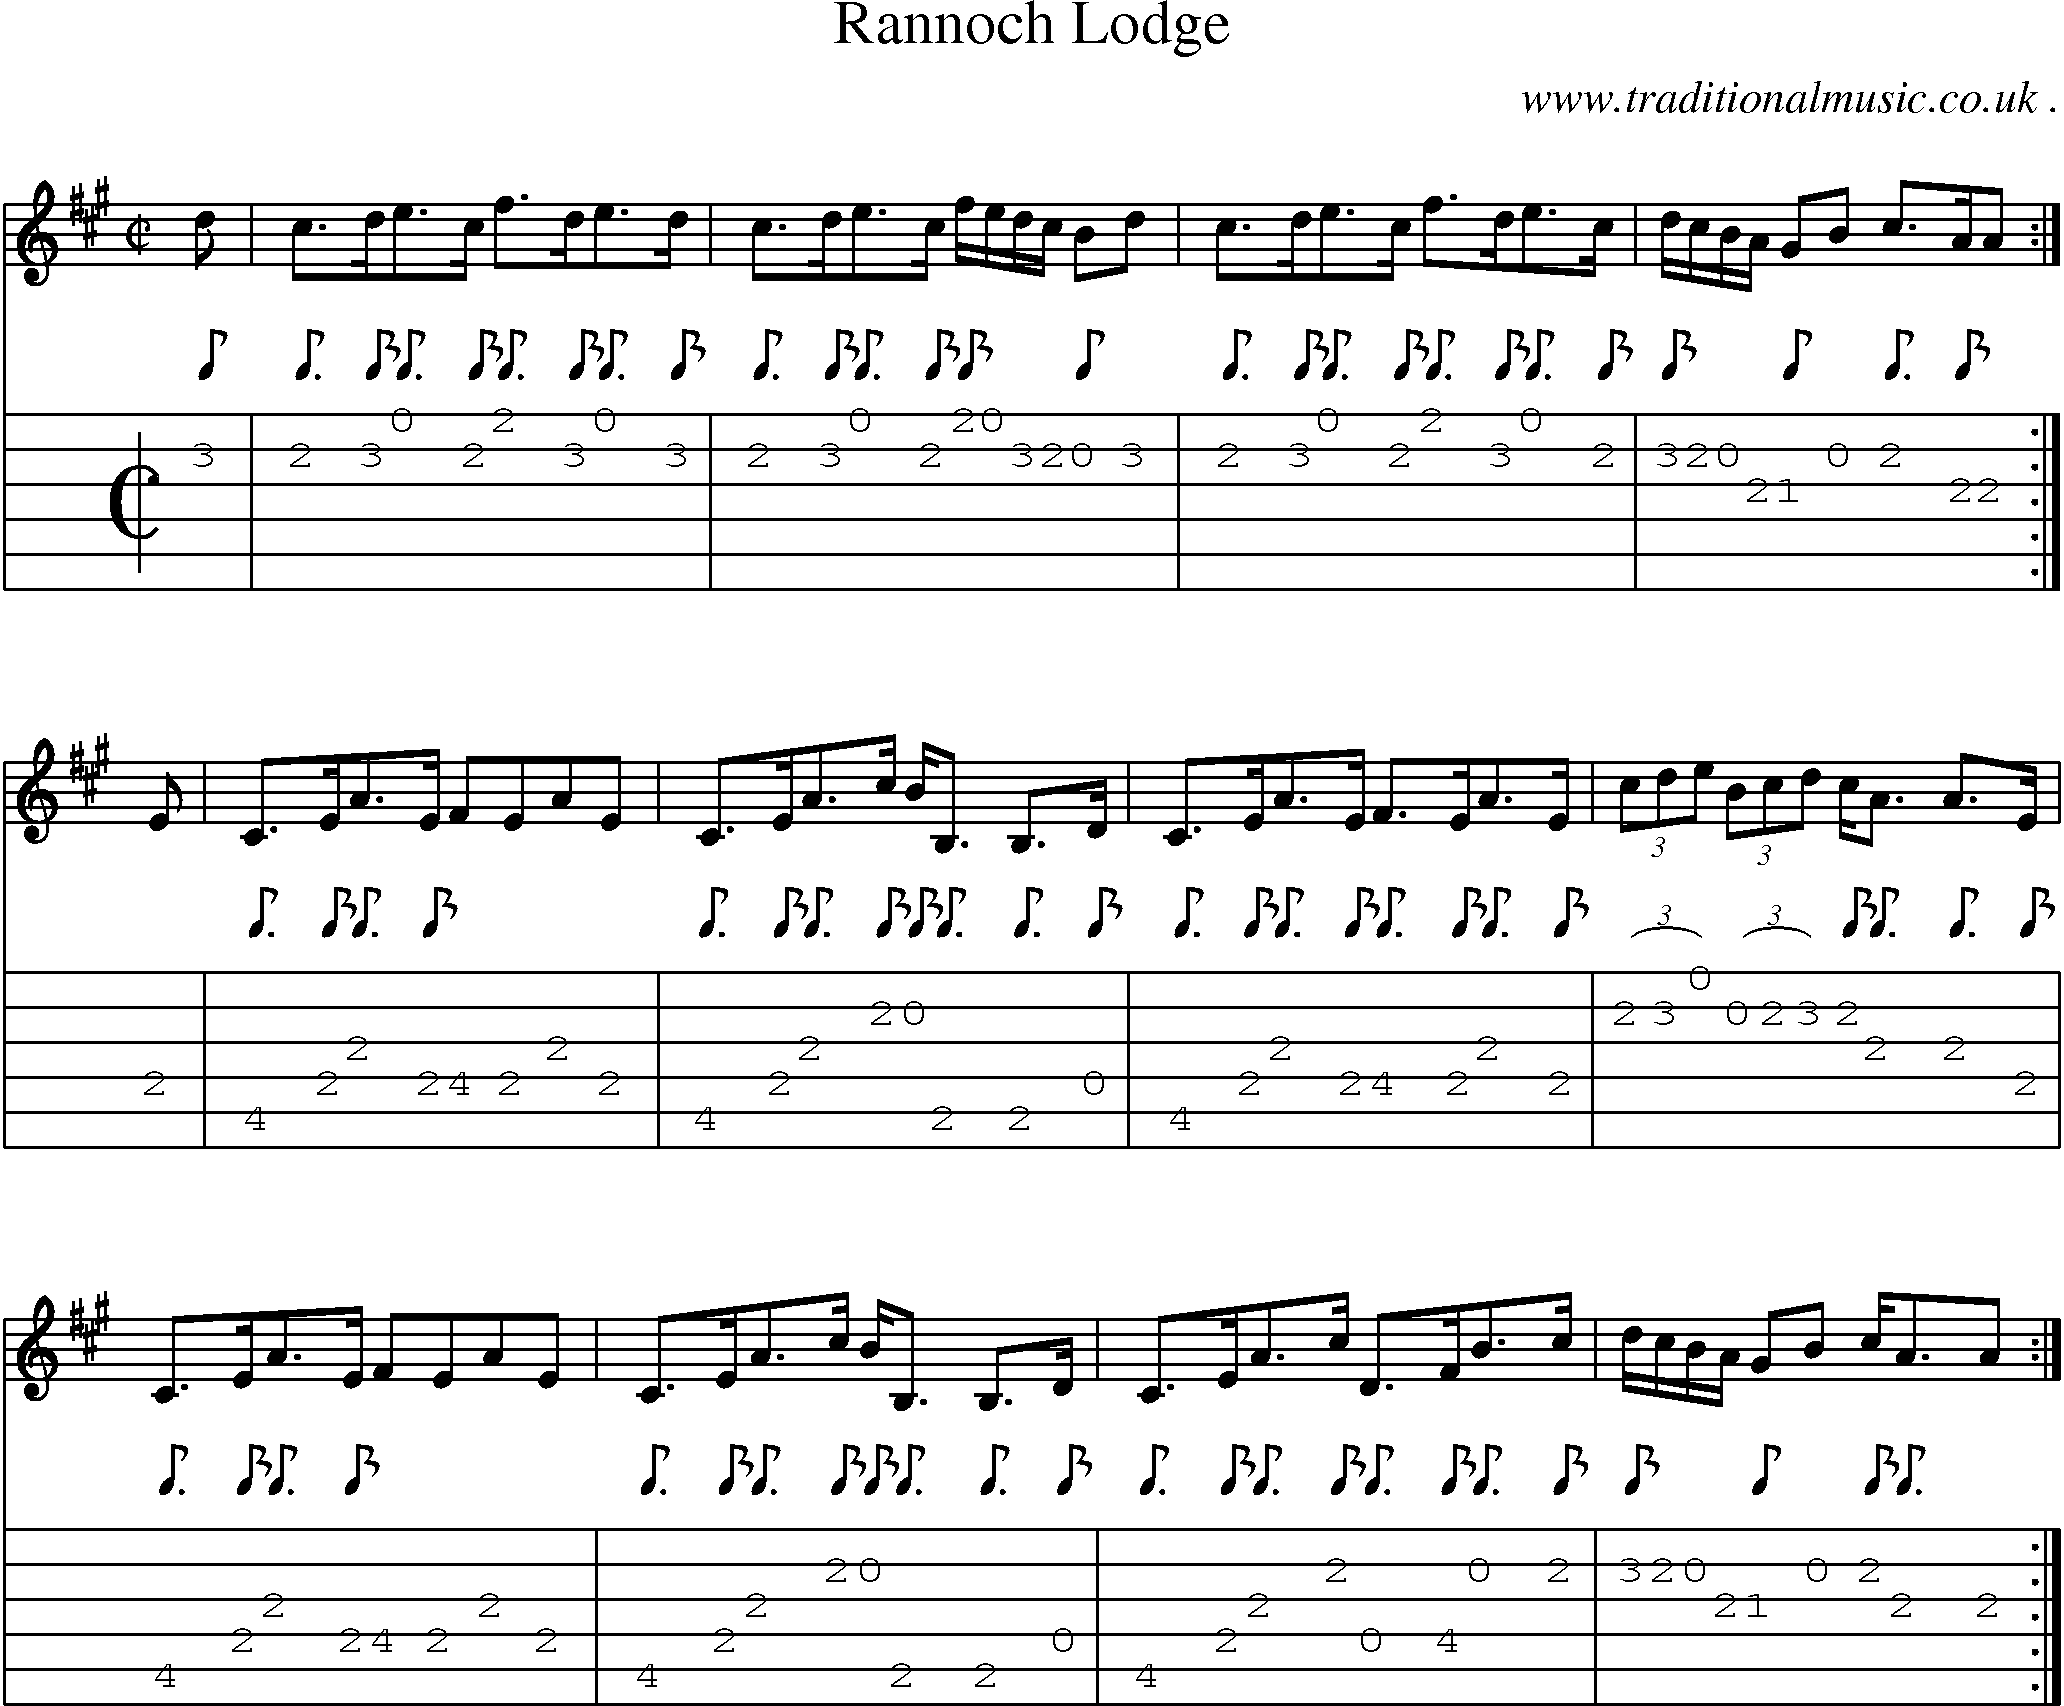 Sheet-music  score, Chords and Guitar Tabs for Rannoch Lodge